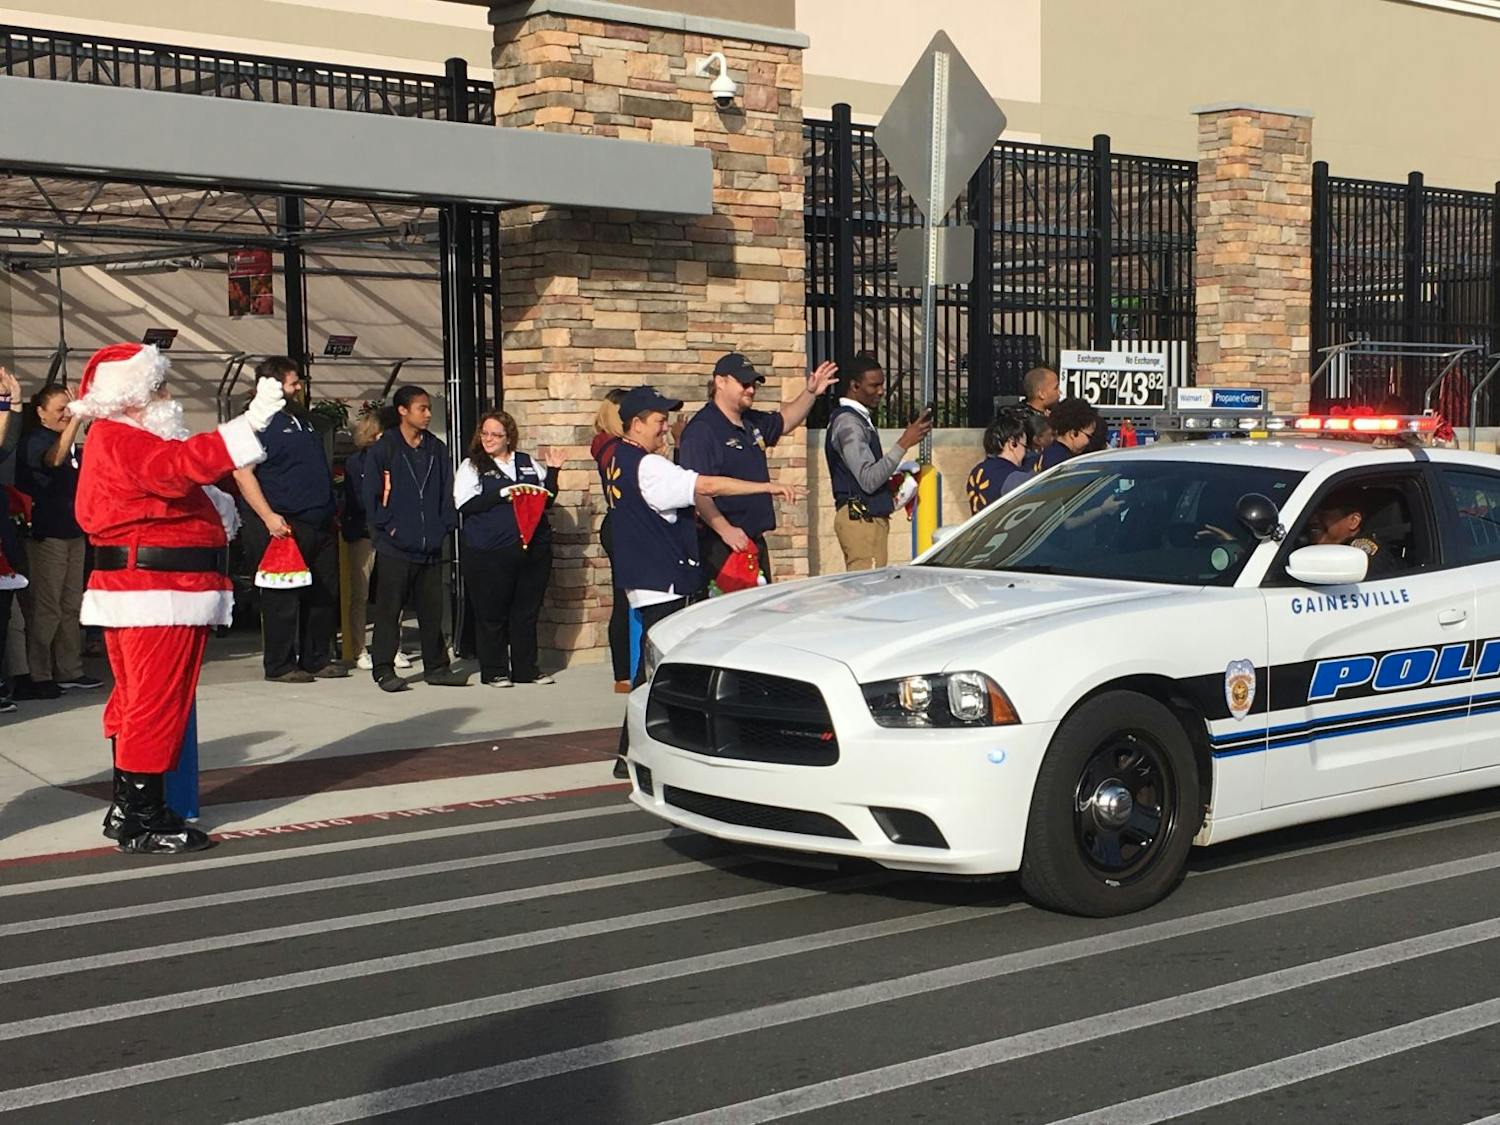 More than 20 Alachua County students arrived at Walmart in police cars. Santa along with an eager group of Walmart employees greeted them before they began shopping.&nbsp;